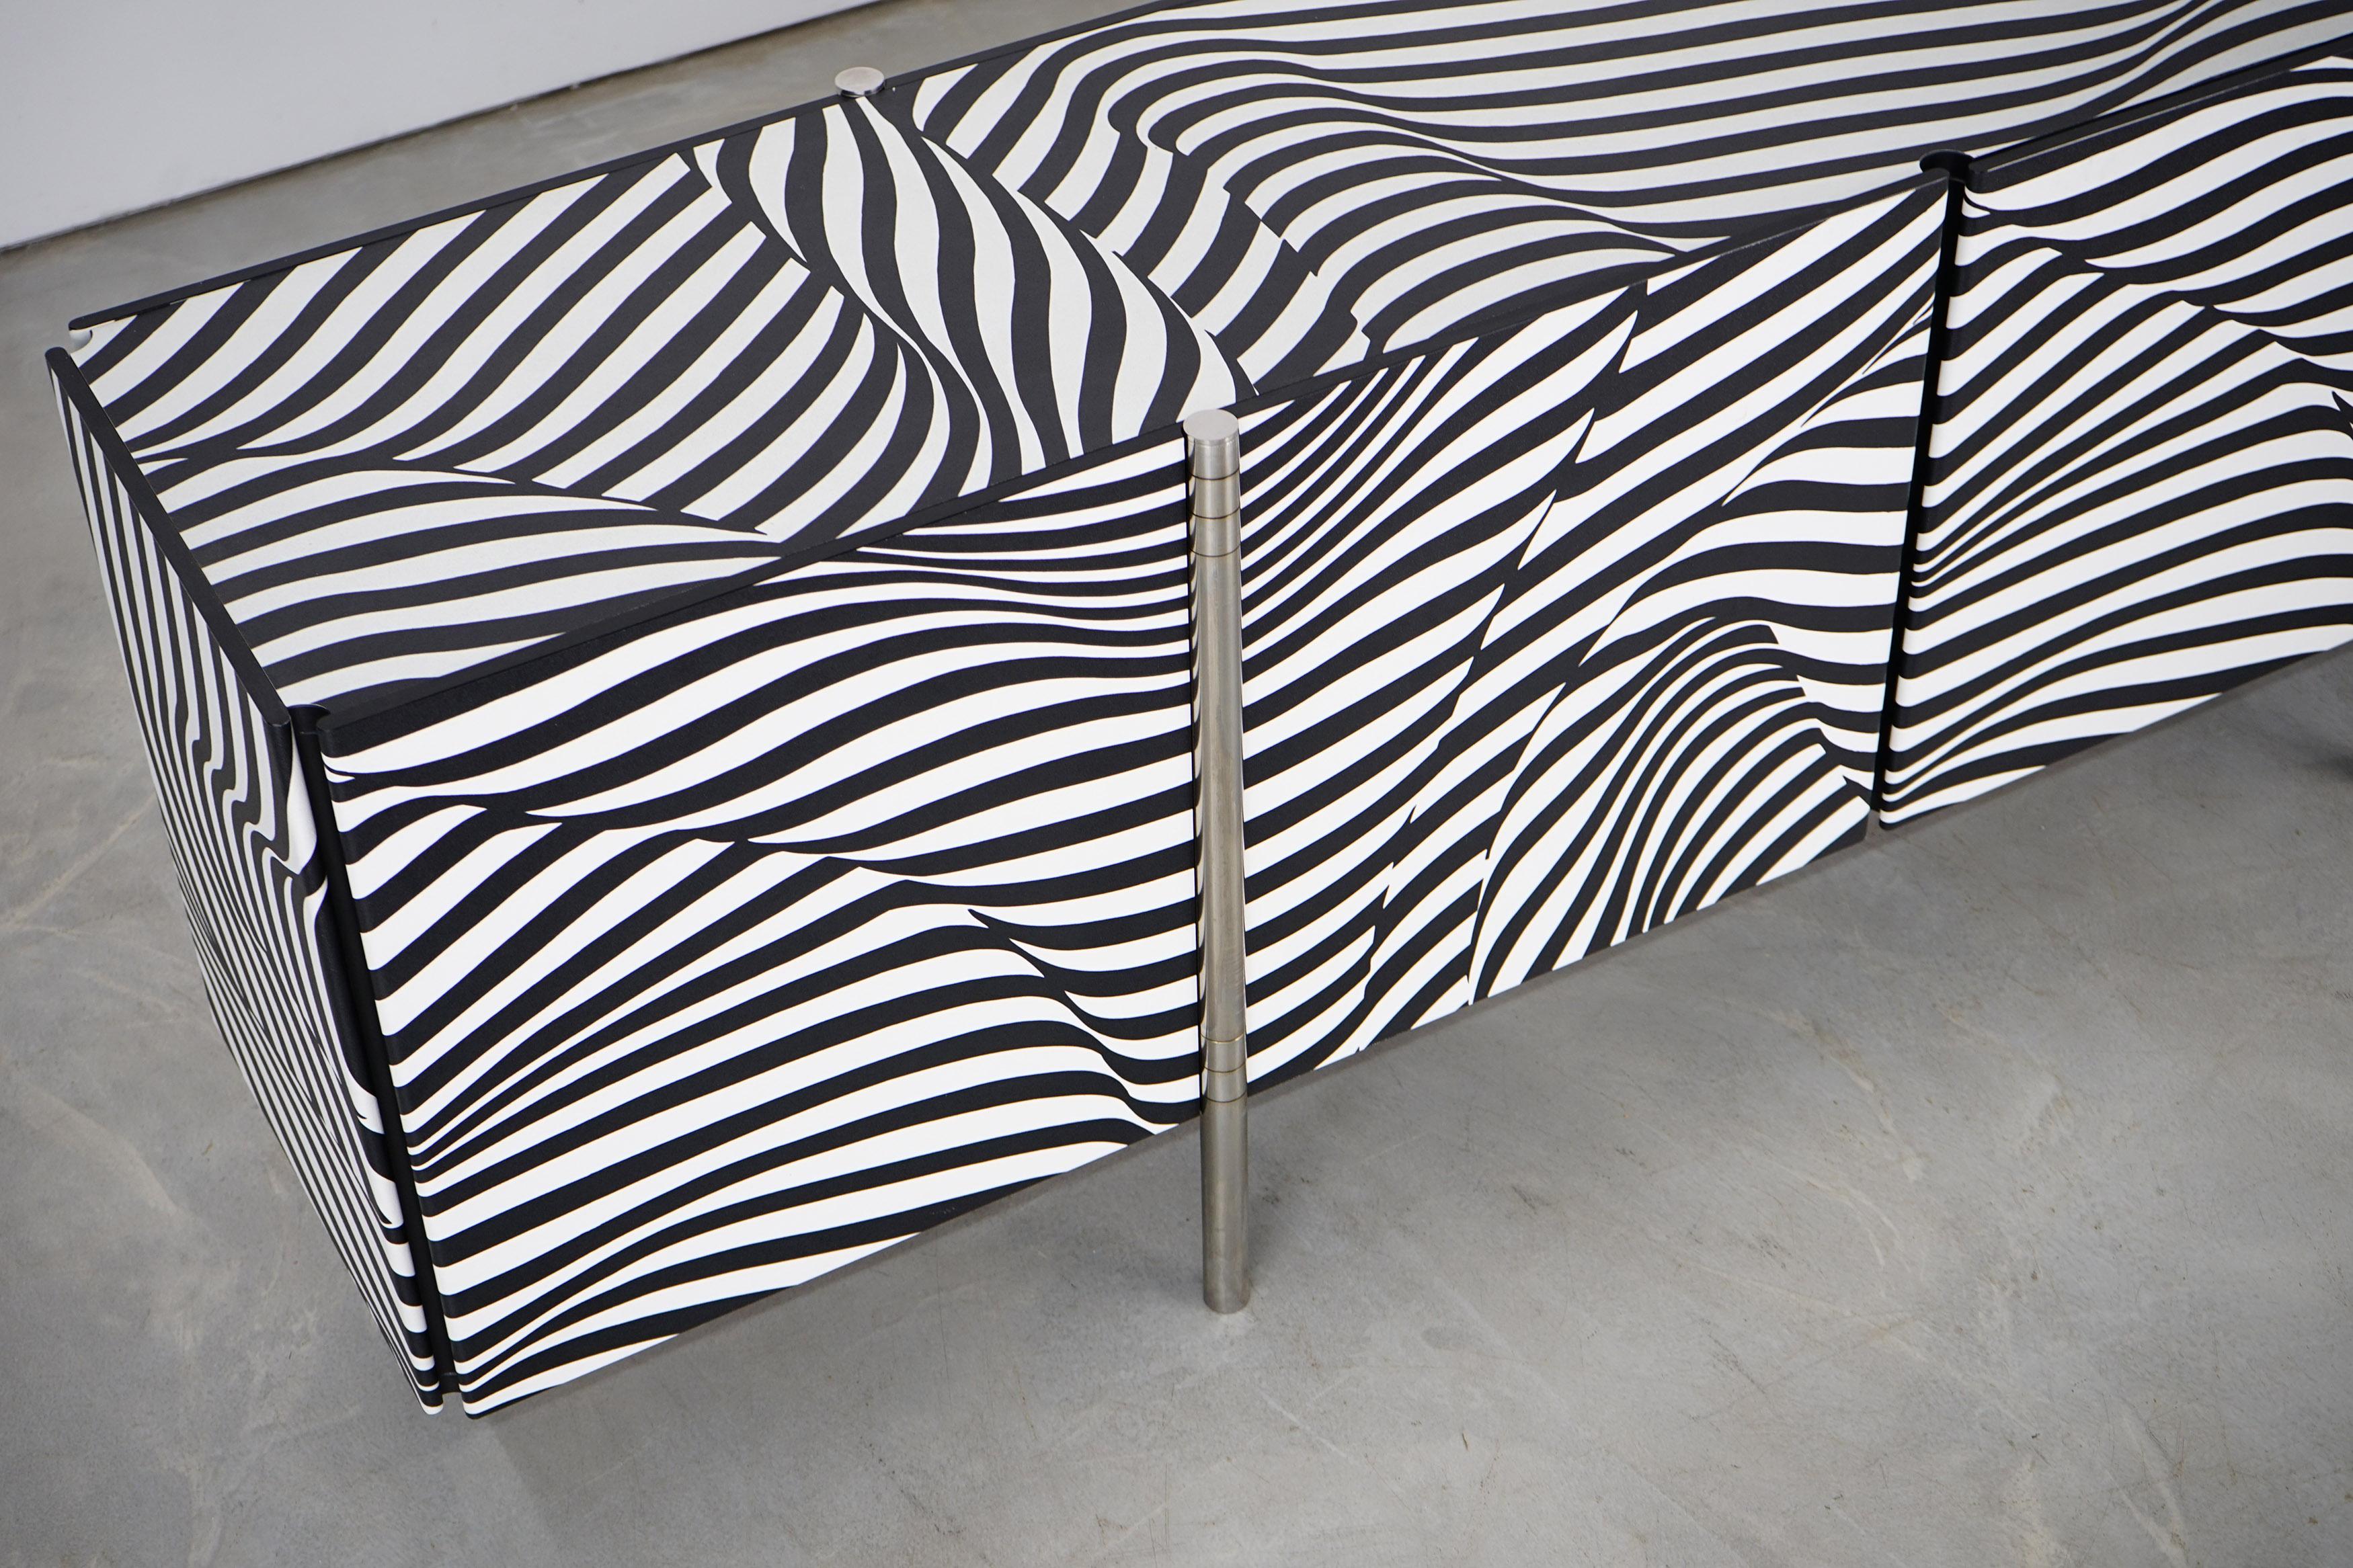 20th Century Amor Stripe 12 Sideboard by Robert and Trix Haussmann for Wogg, Original Edition